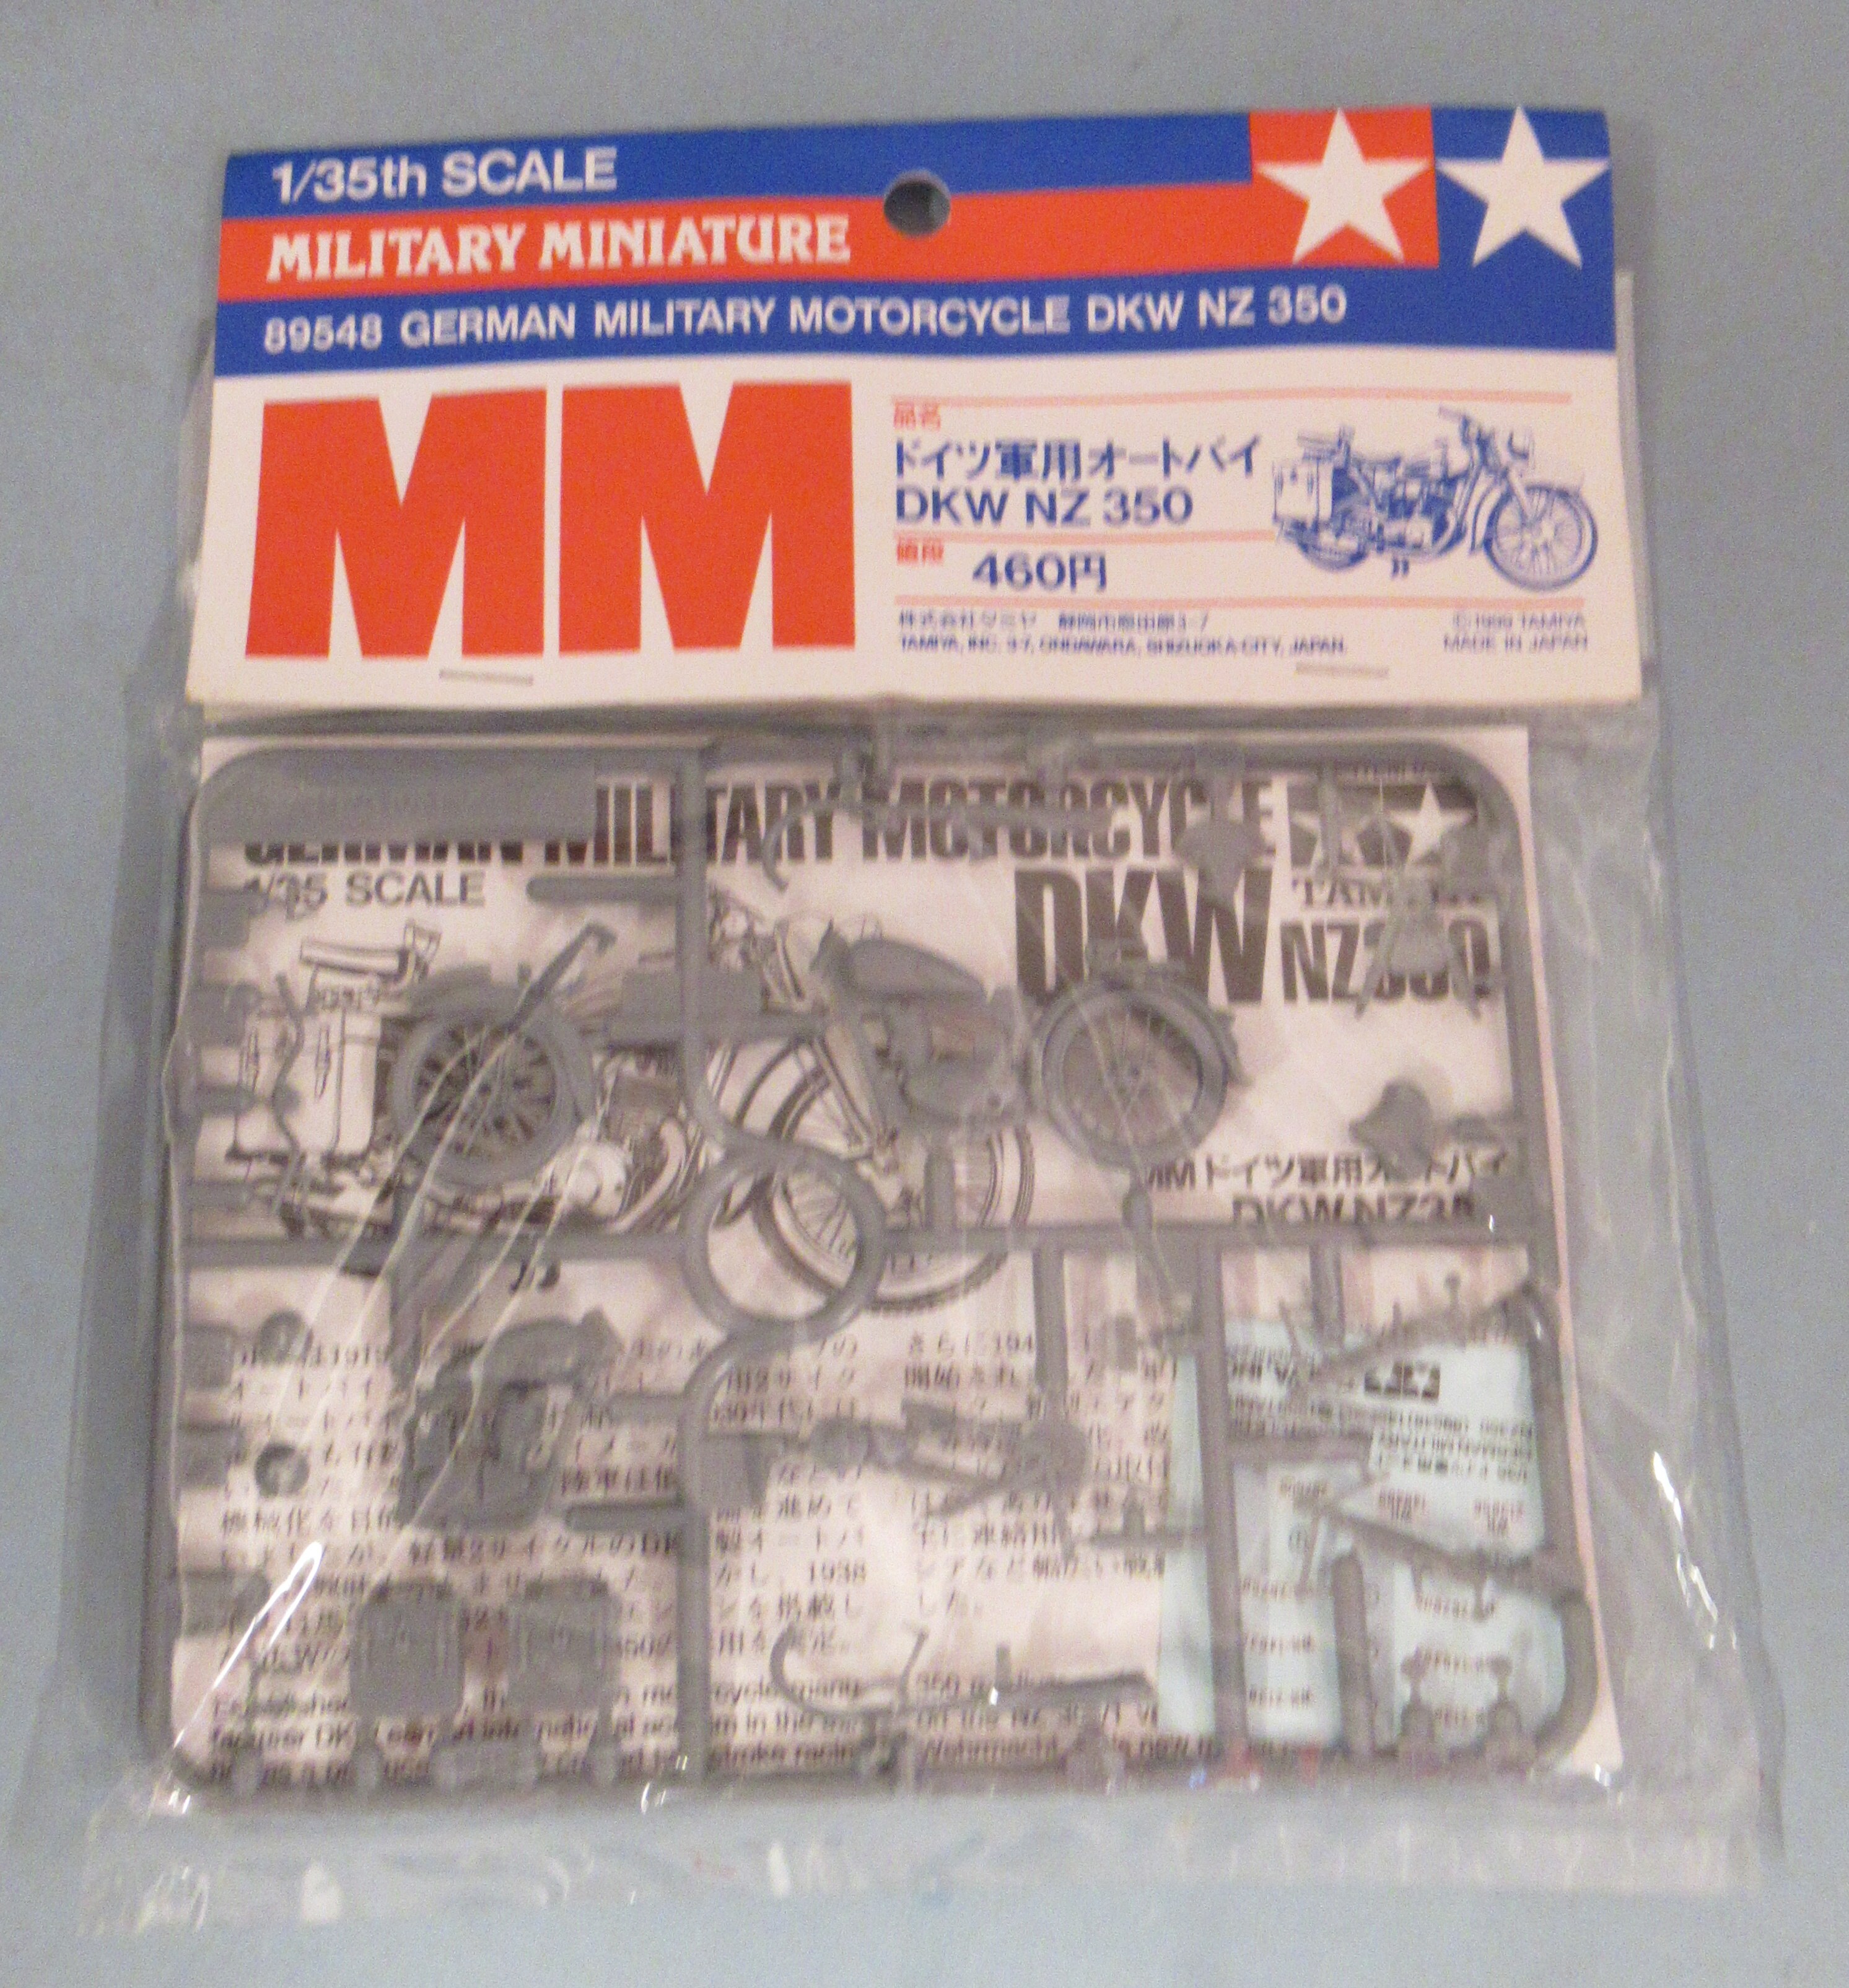 Details about   Tamiya MM Militray Miniature 89548 German Military Motorcycle DKW NZ 350 Model